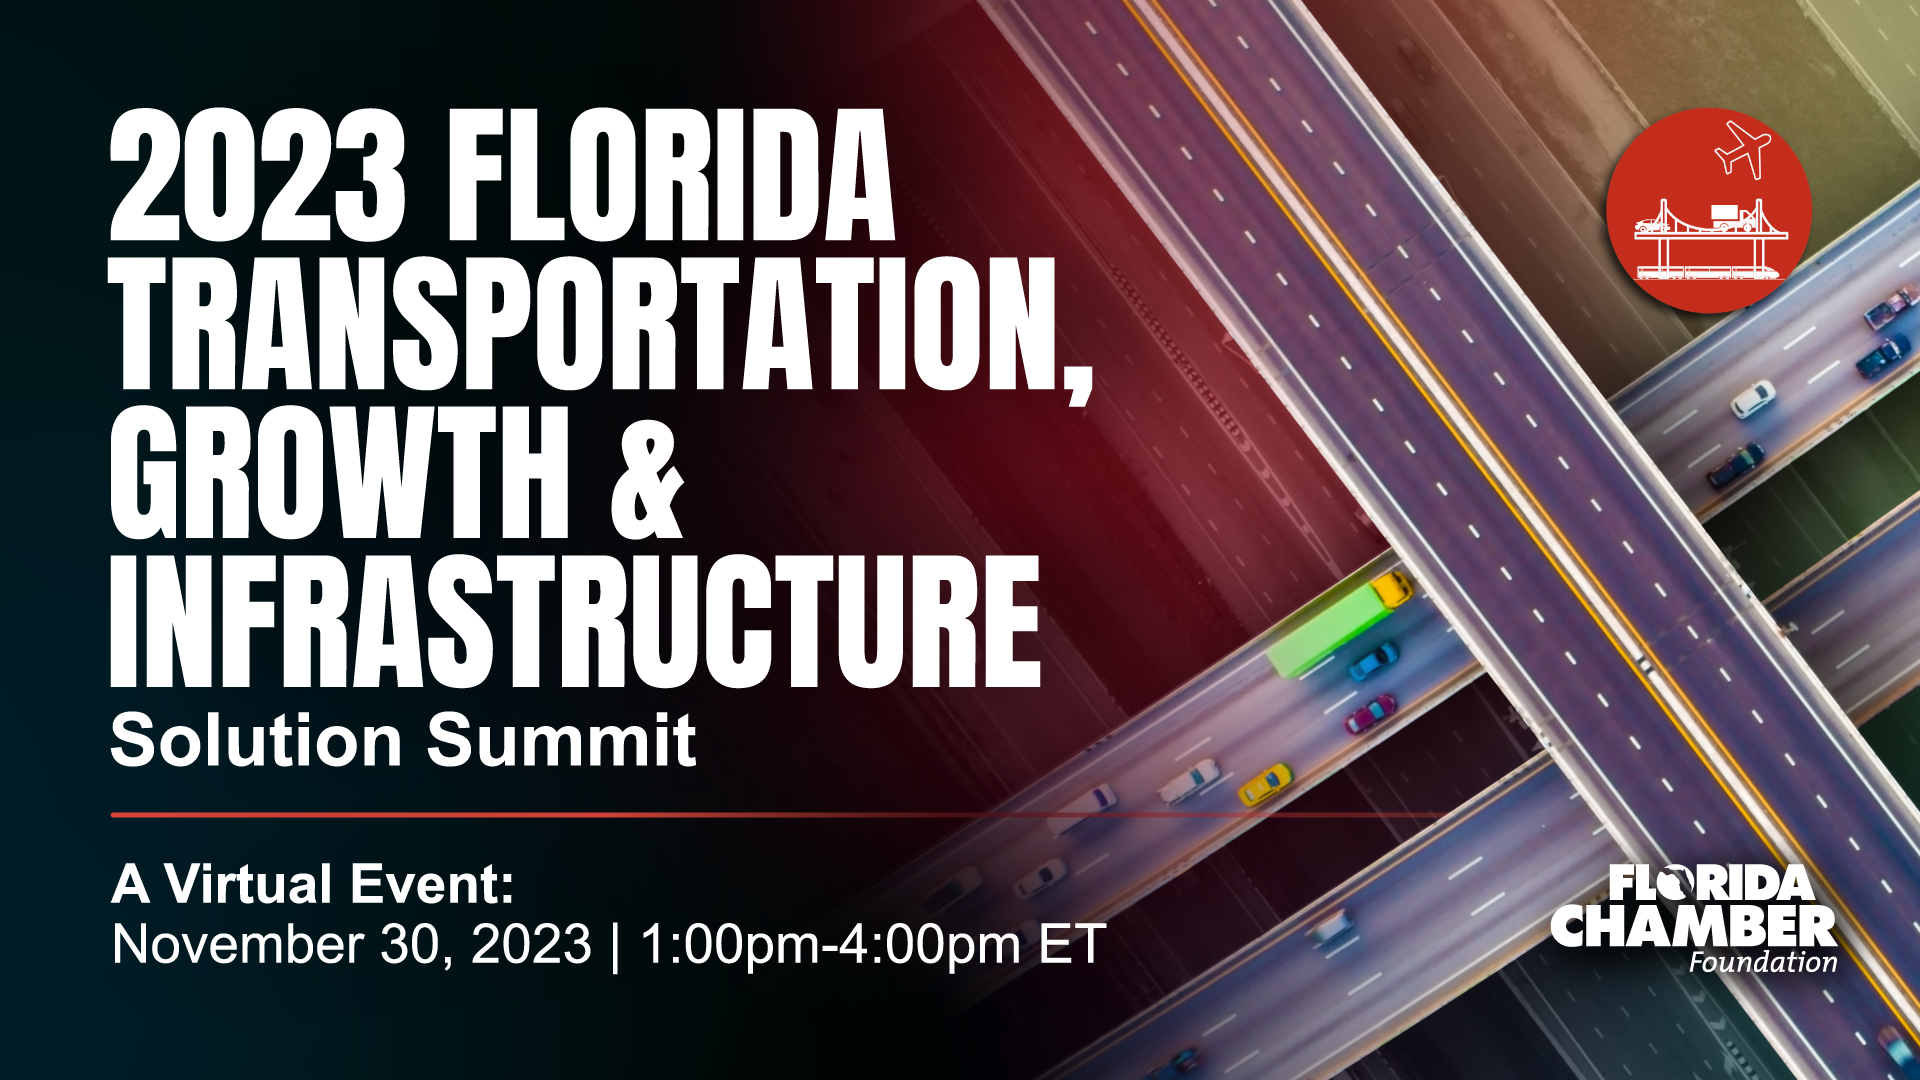 2023 Florida Transportation, Growth, and Infrastructure A Virtual Event November 30, 2023 | 1:00pm-4:00pm ET A Virtual Event November 30, 2023 | 1:00pm-4:00pm ET